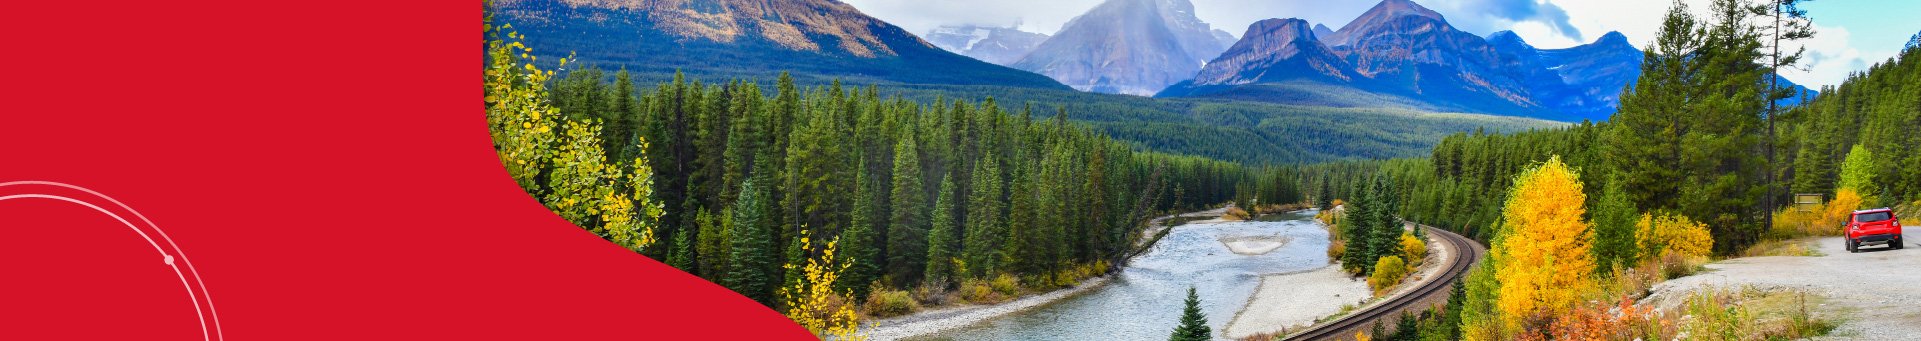 To give a breakdown of the various awesome activities that you can do if you choose to visit Banff National Park
